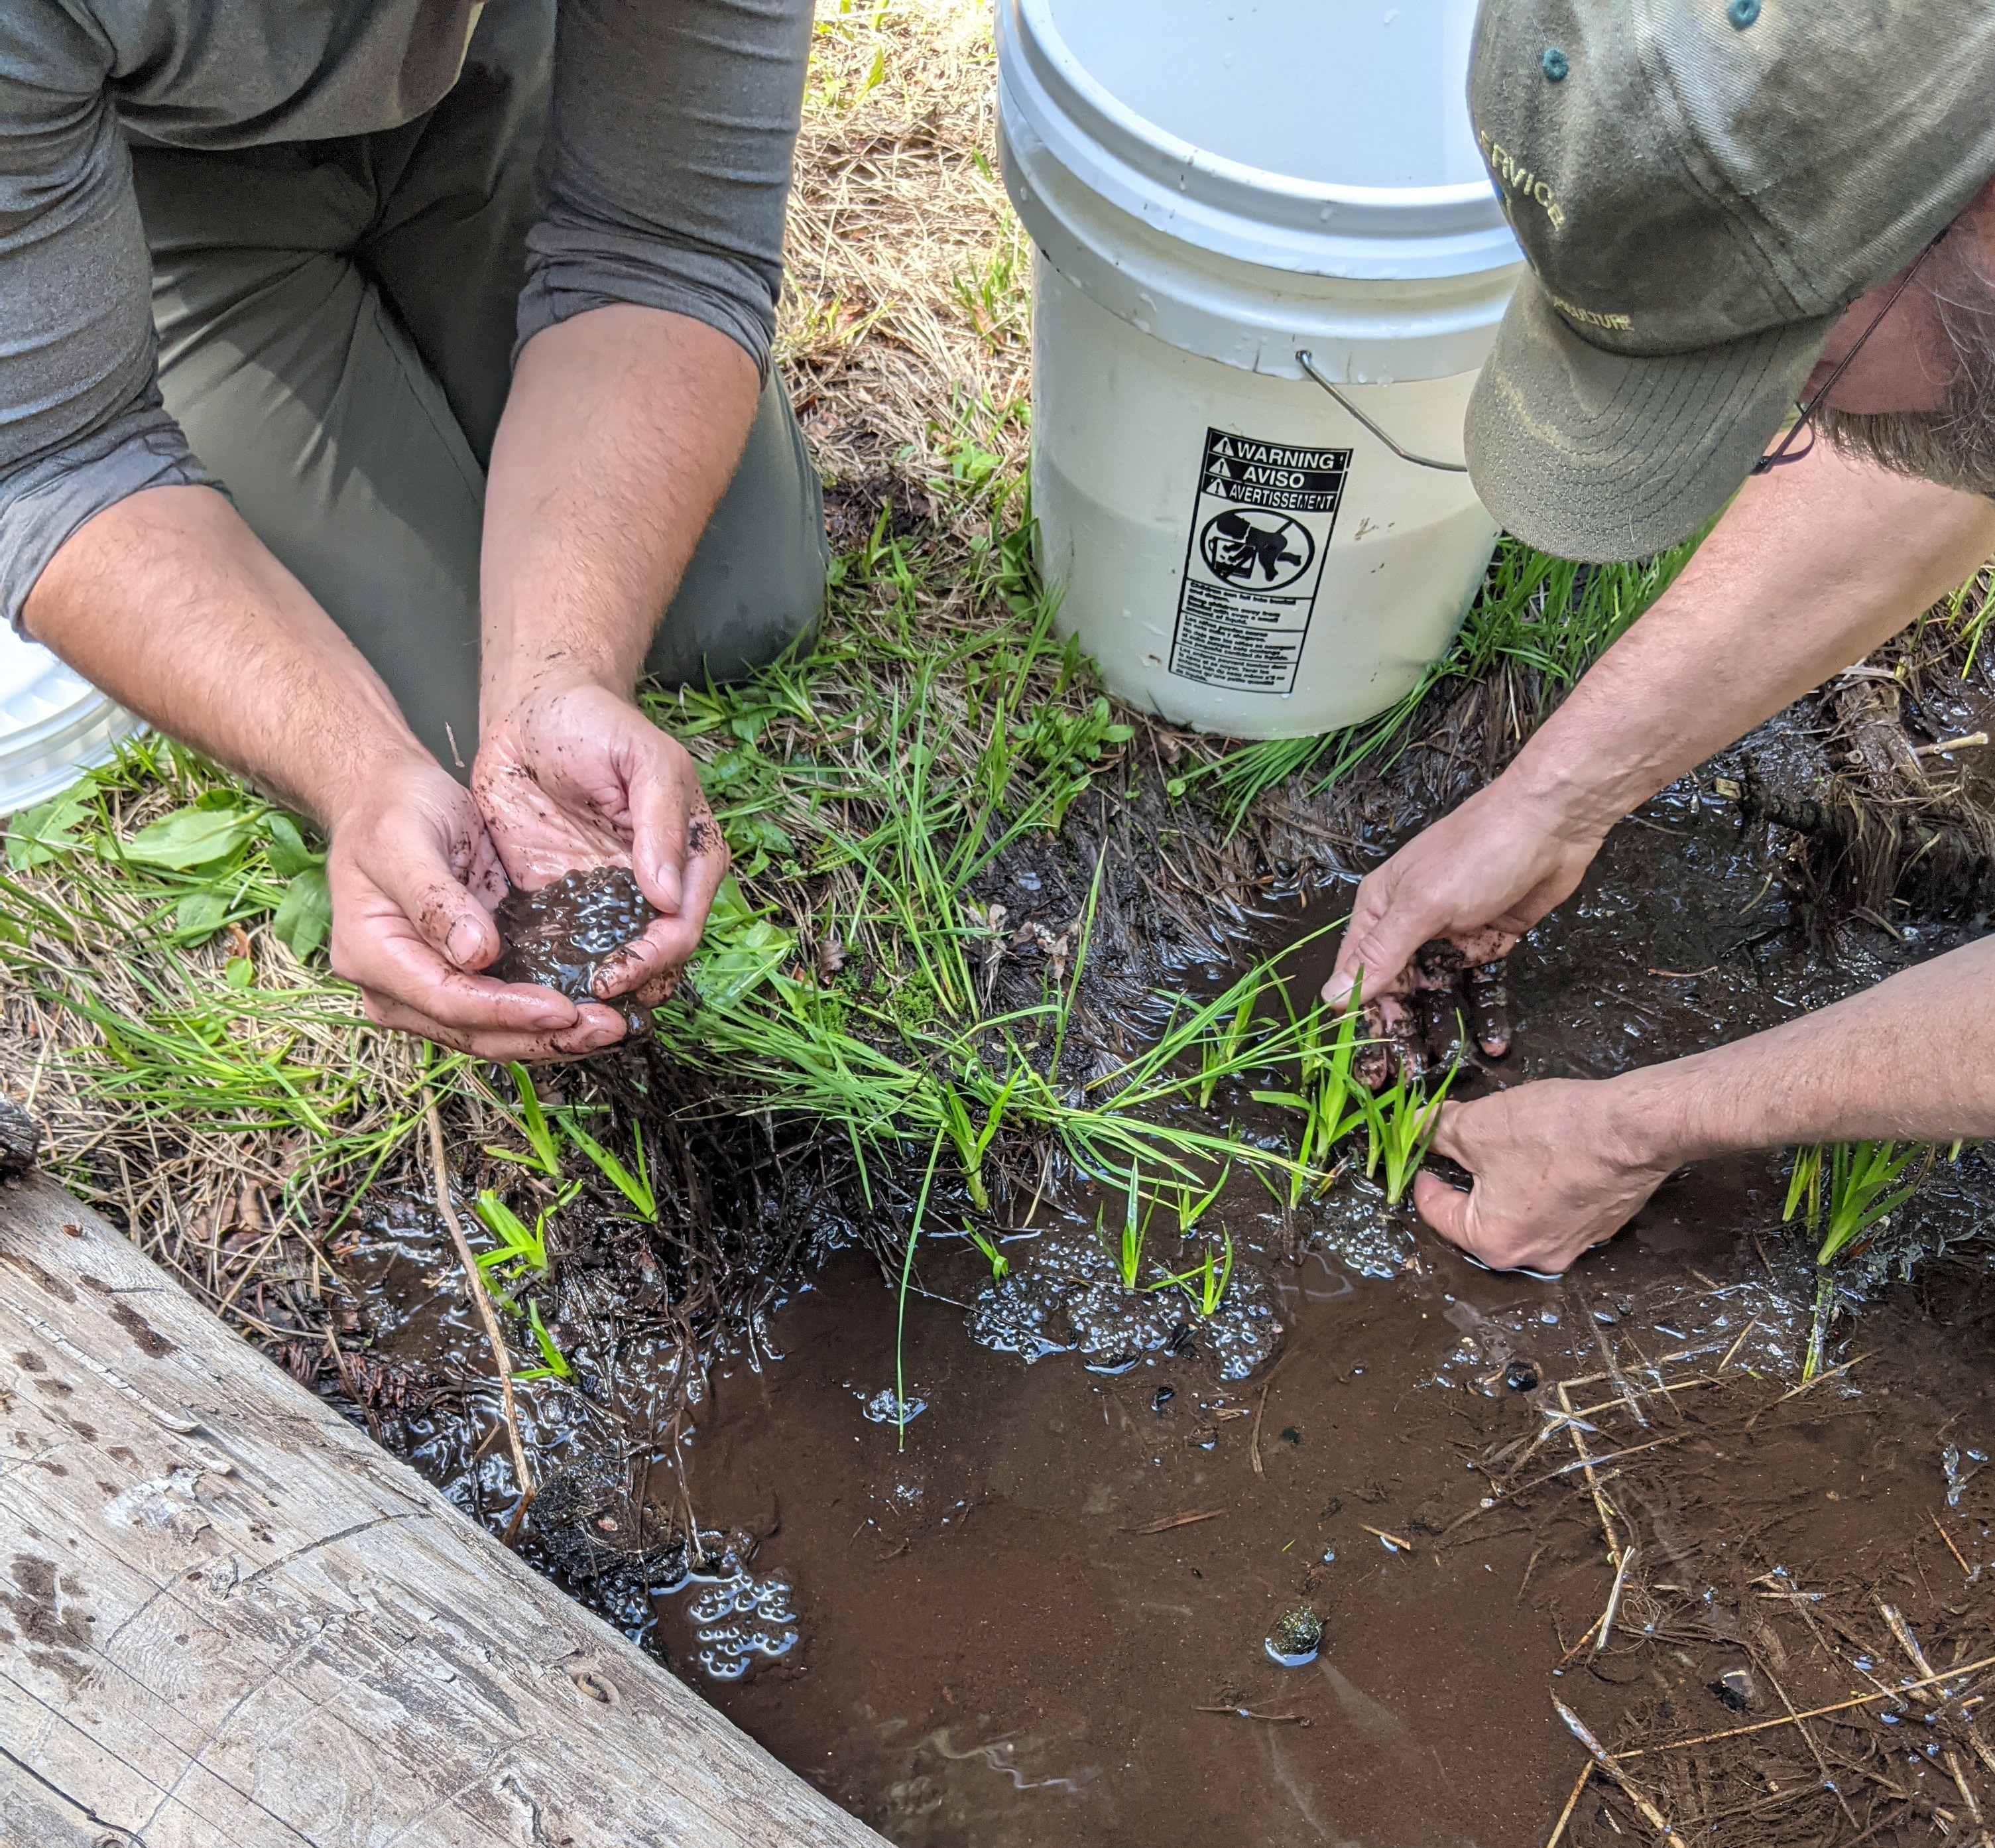 Biologists carefully collect Sierra Nevada yellow-legged frog egg masses from a drying stream for relocation